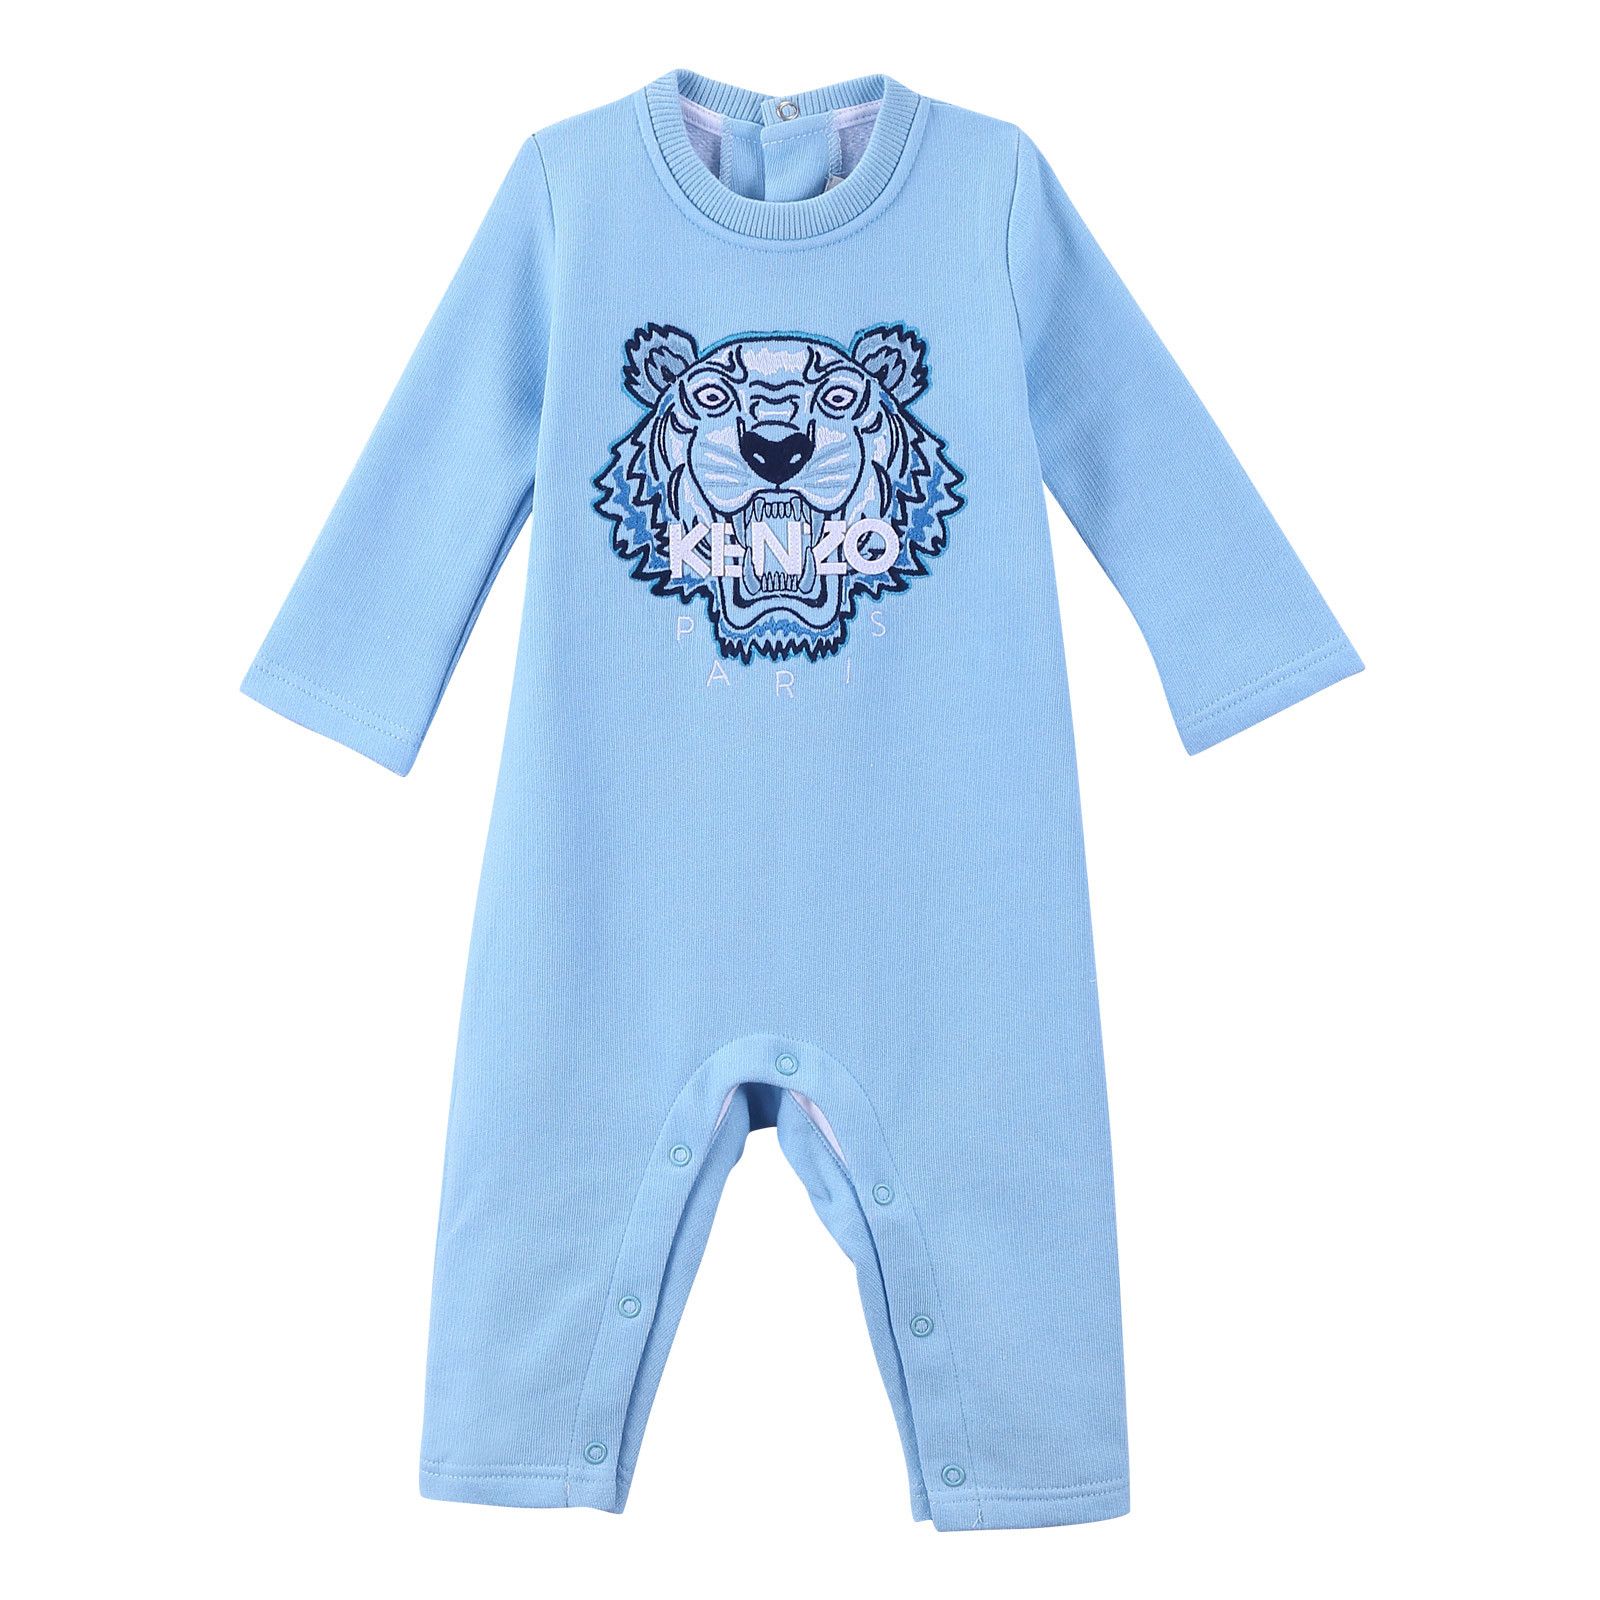 Baby Sky Blue Cotton Embroidered Tiger Head Babygrow - CÉMAROSE | Children's Fashion Store - 1